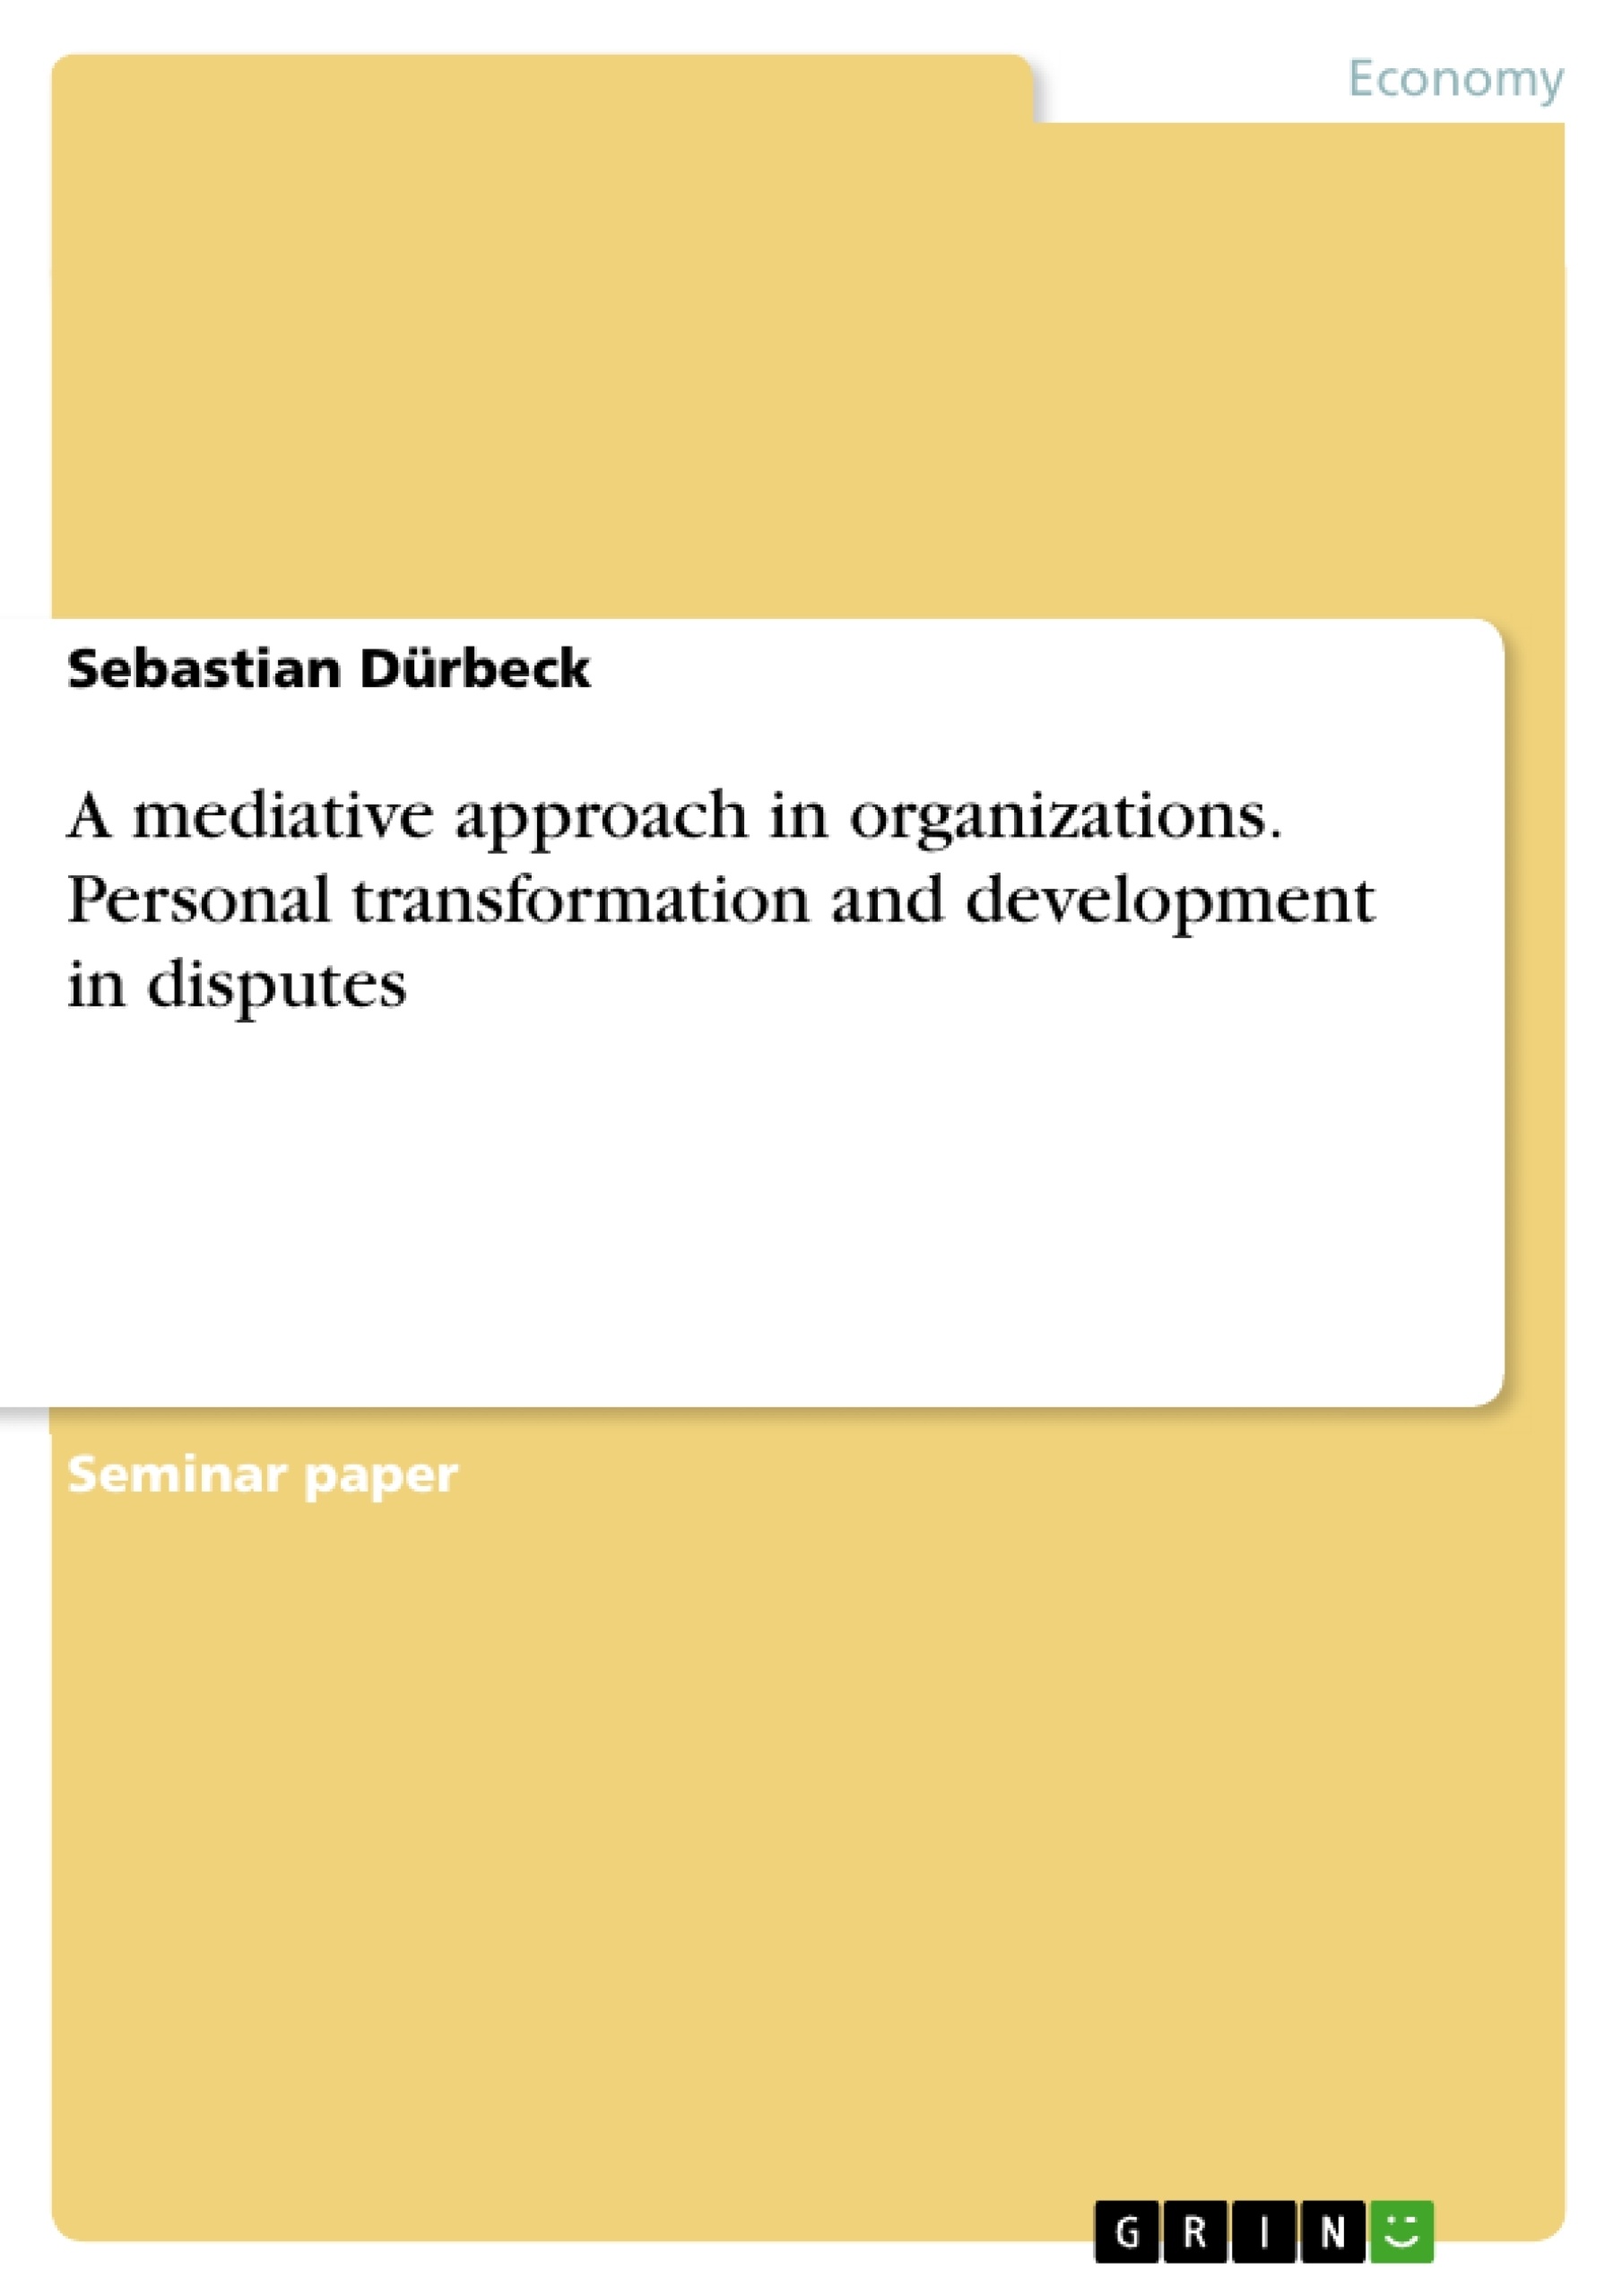 Título: A mediative approach in organizations. Personal transformation and development in disputes